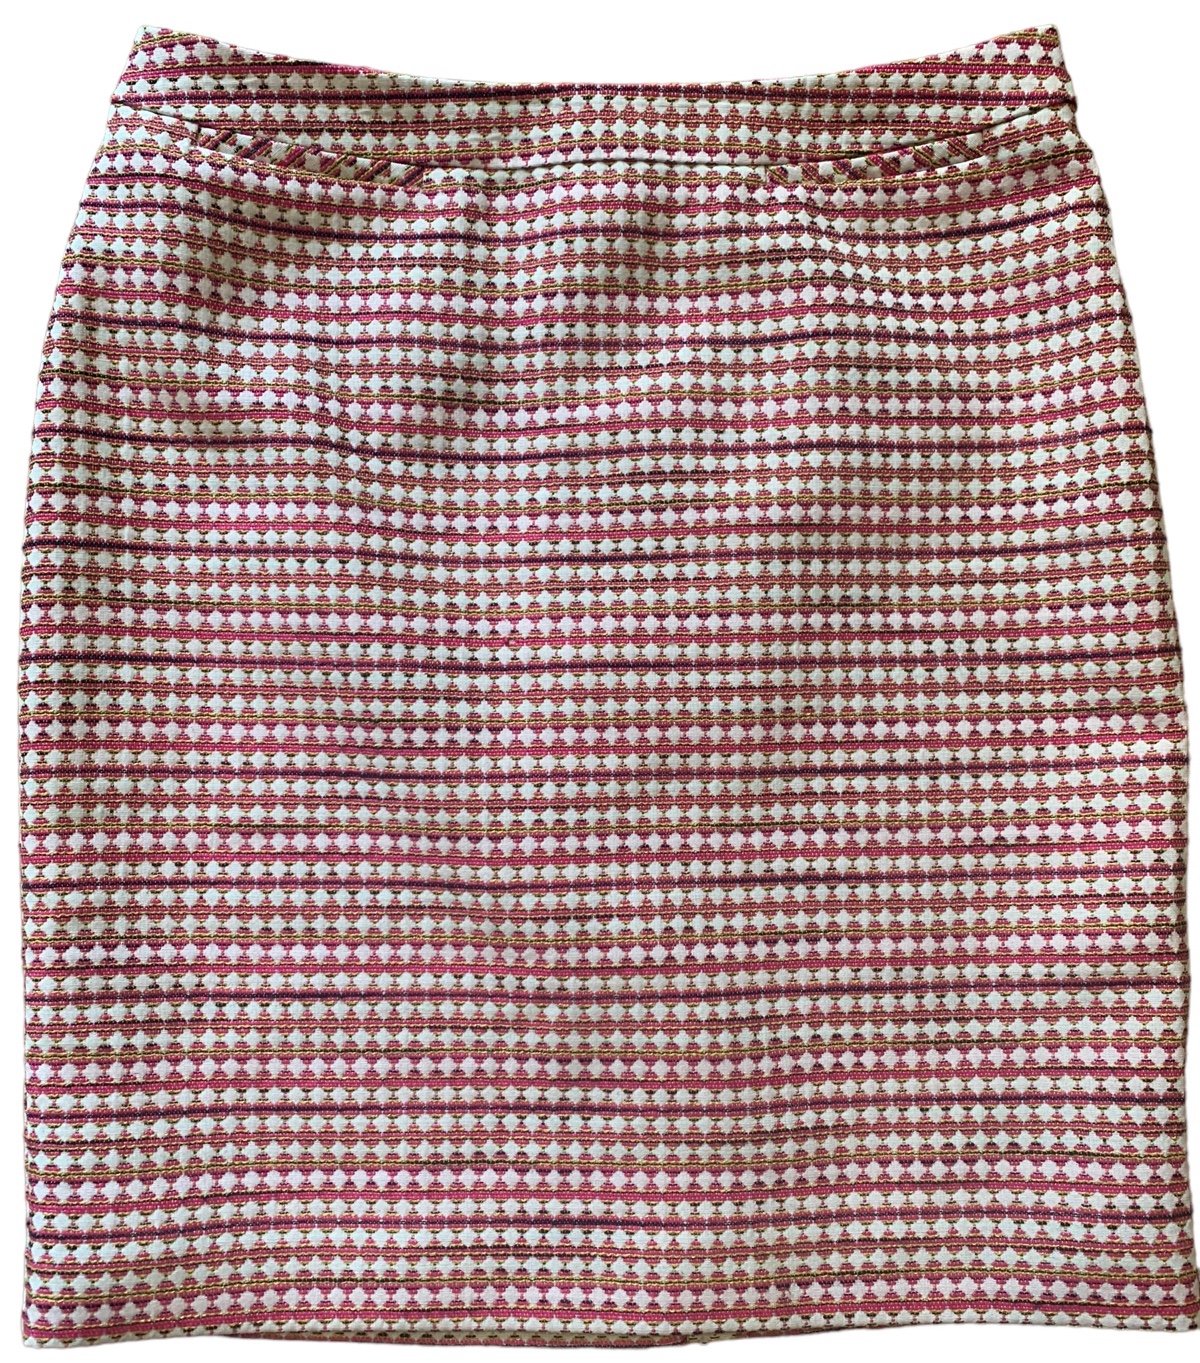 the Lowest price Women’s pink multicolored Halogen Business Dress Skirt H60qLRlHd Low Price